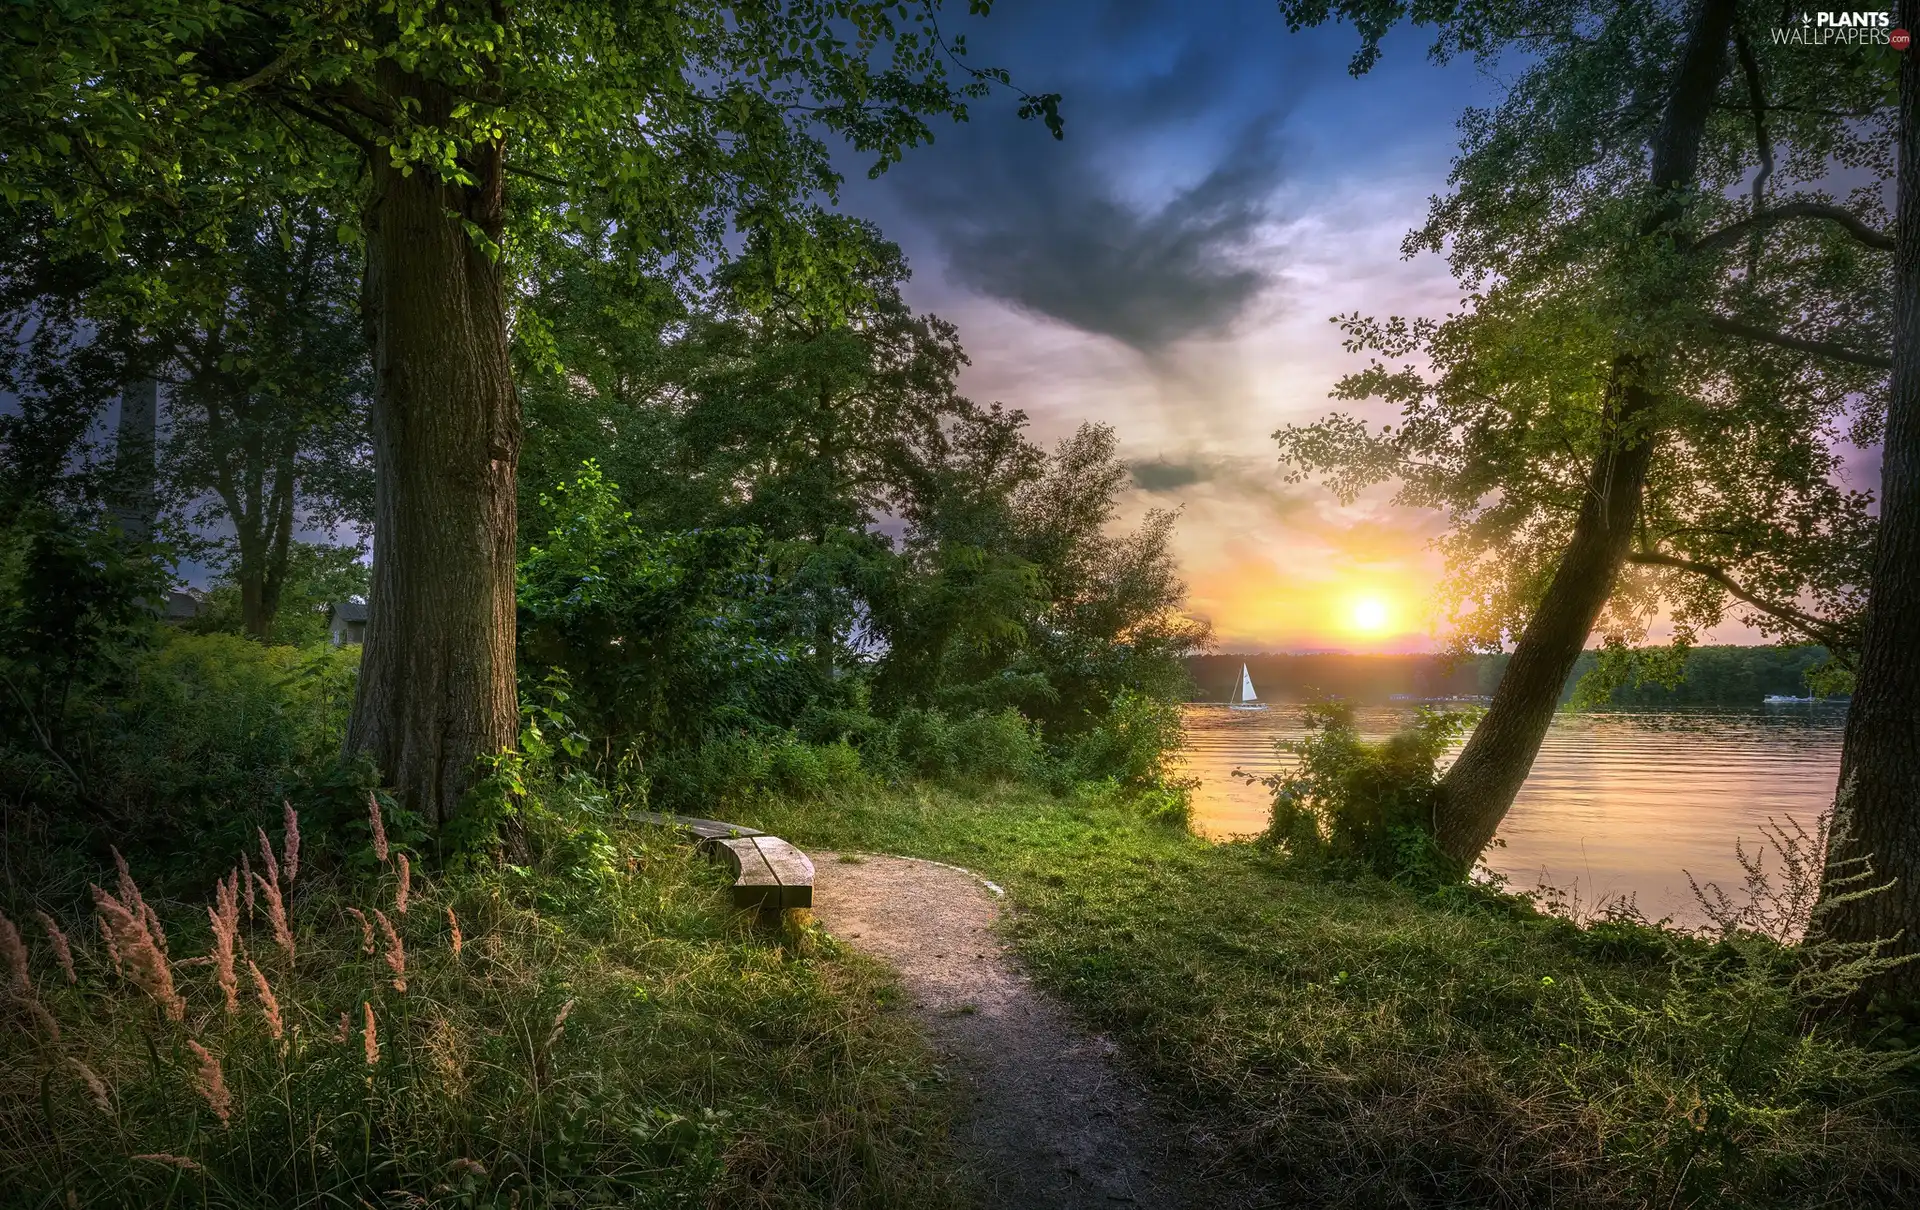 lake, Park, trees, viewes, clouds, Yacht, Path, Sunrise, Bench